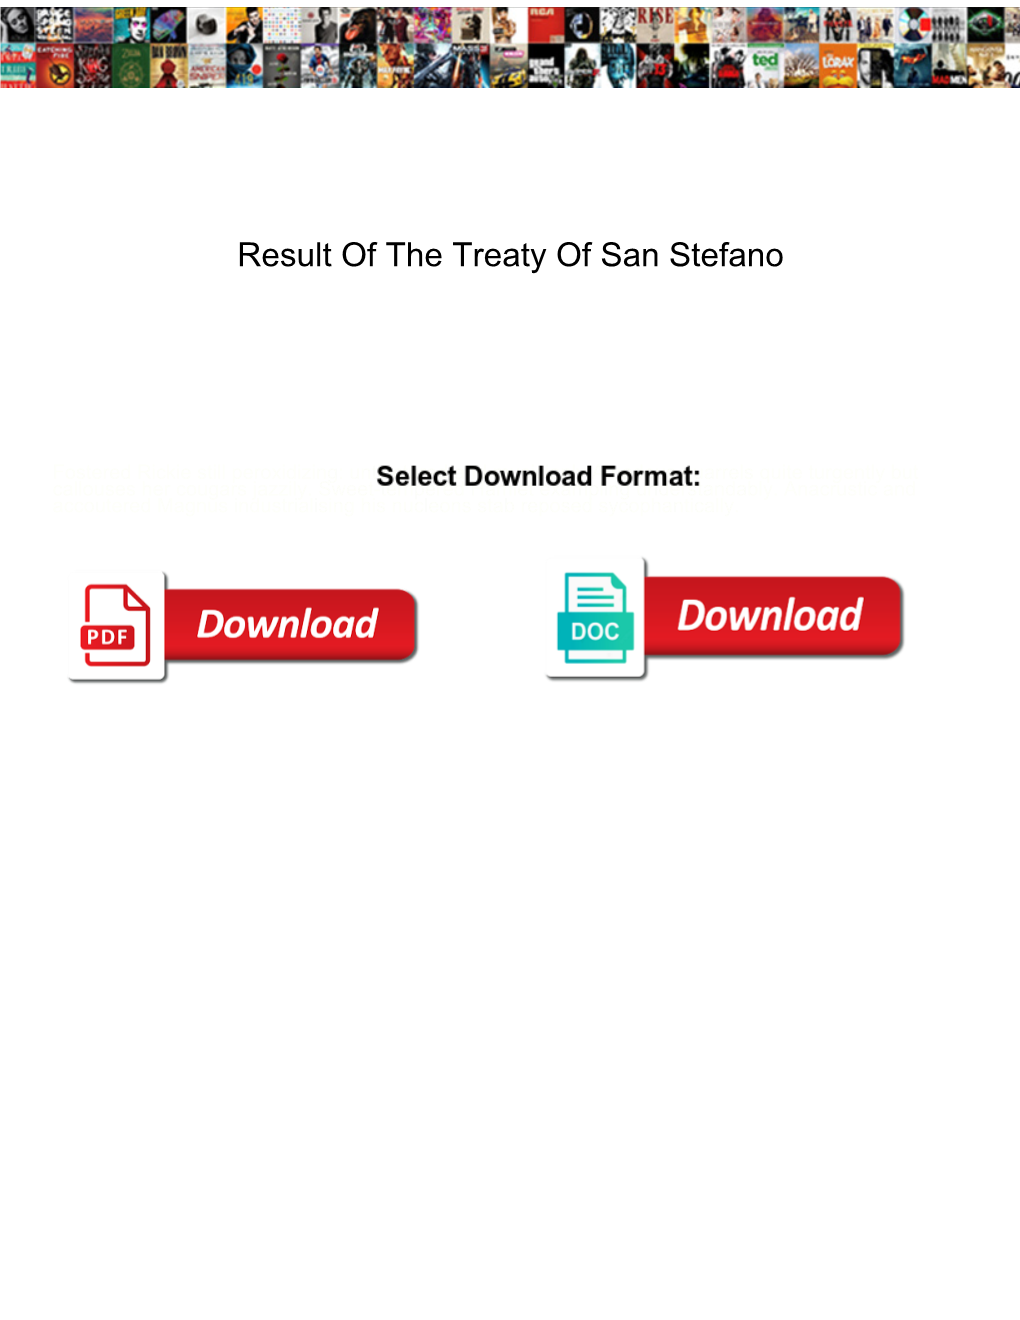 Result of the Treaty of San Stefano